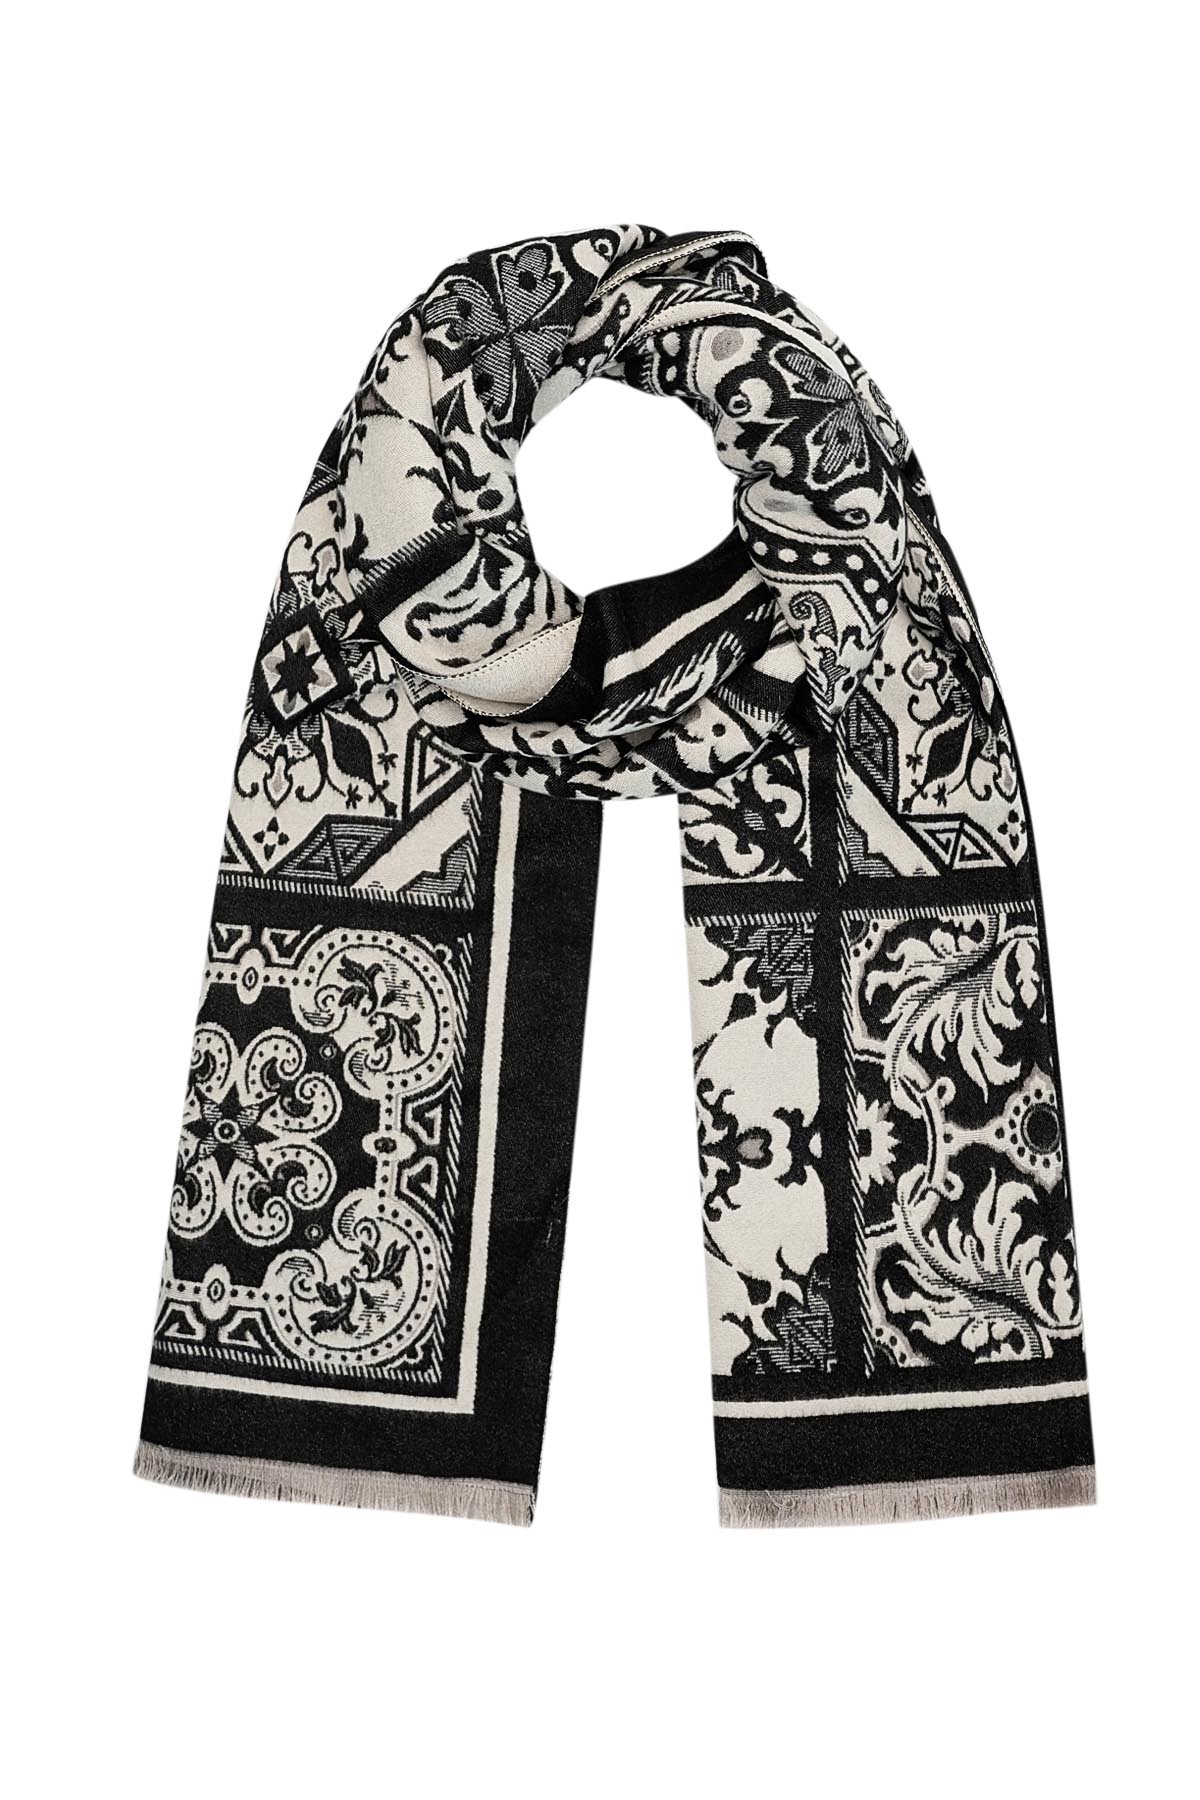 Scarf with retro print - black and white